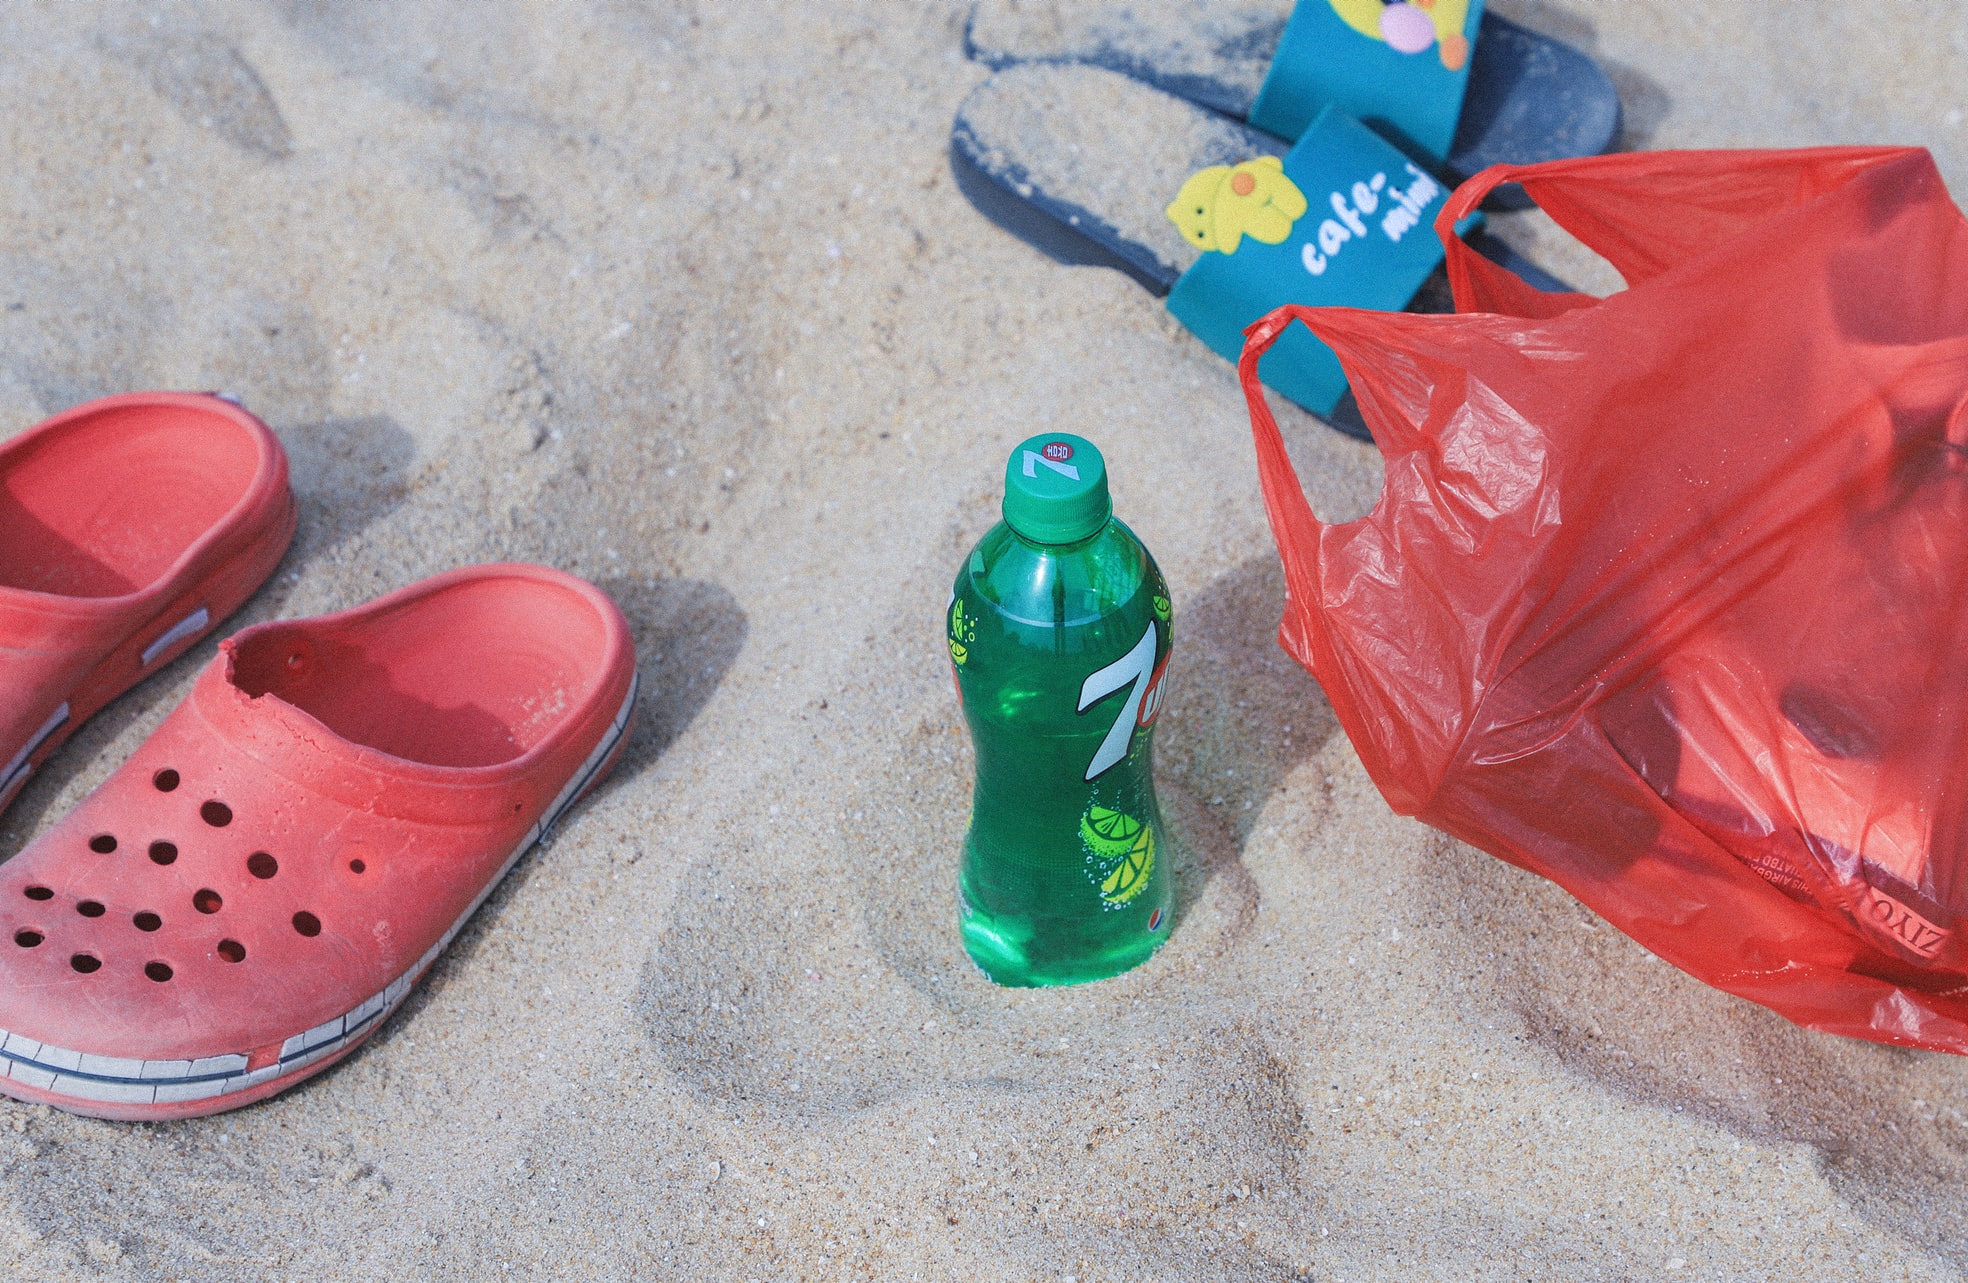 Plastics take a long time to break down, and microplastics are a result of that process. By avoiding the use of plastic containers like water bottles whenever possible you can help keep plastics out of landfills and lessen your consumption.